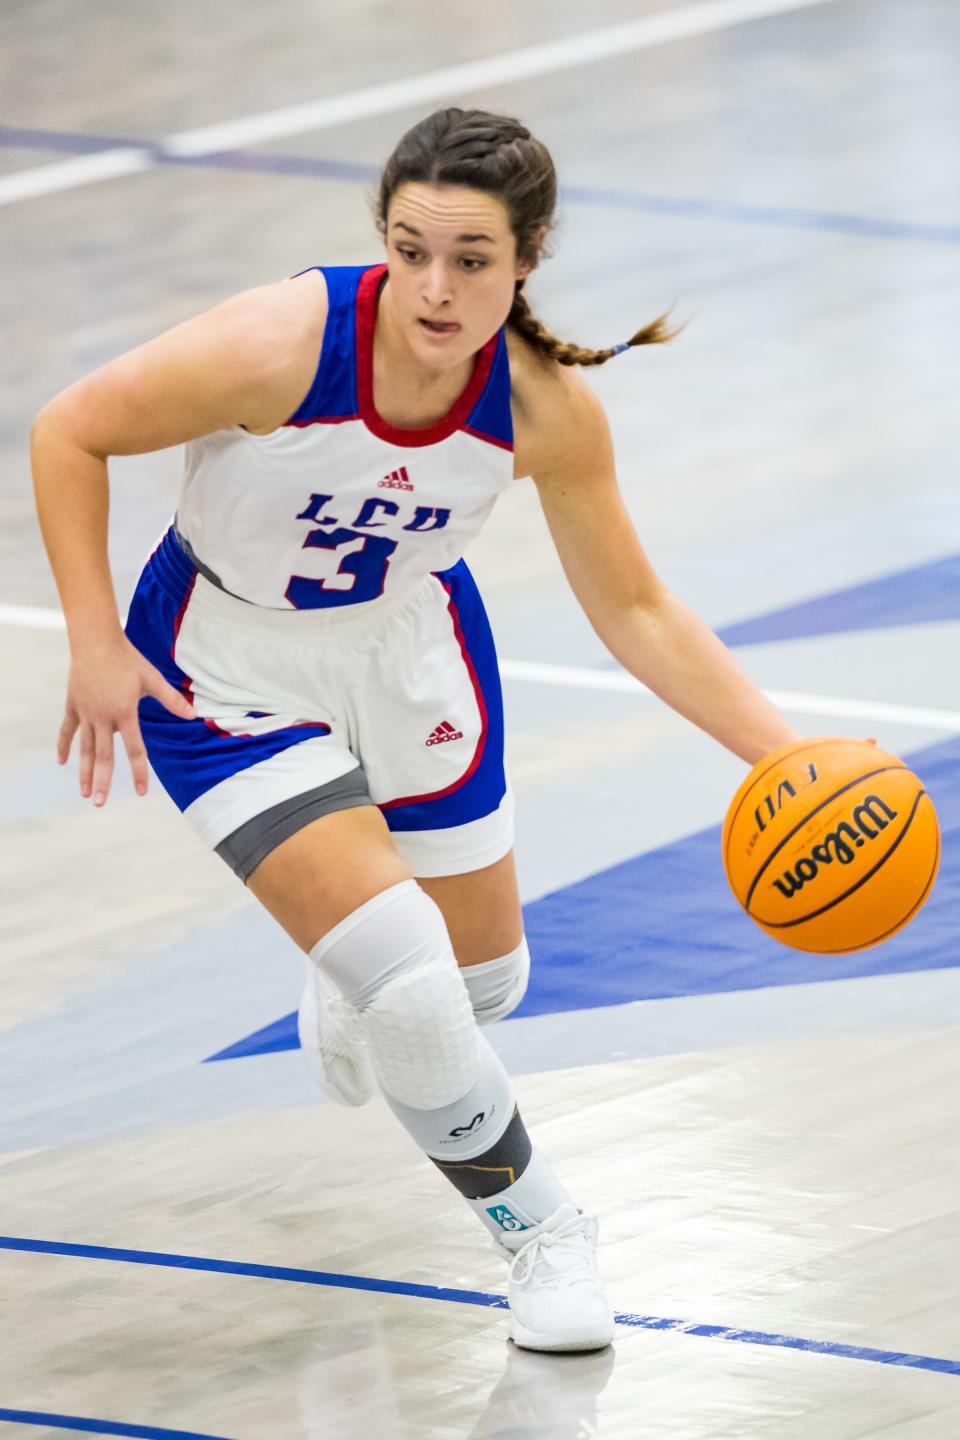 Audrey Robertson scored 18 points and grabbed a career-high 12 rebounds Saturday, but Lubbock Christian University lost at Angelo State 53-51 in Lone Star Conference women's basketball.